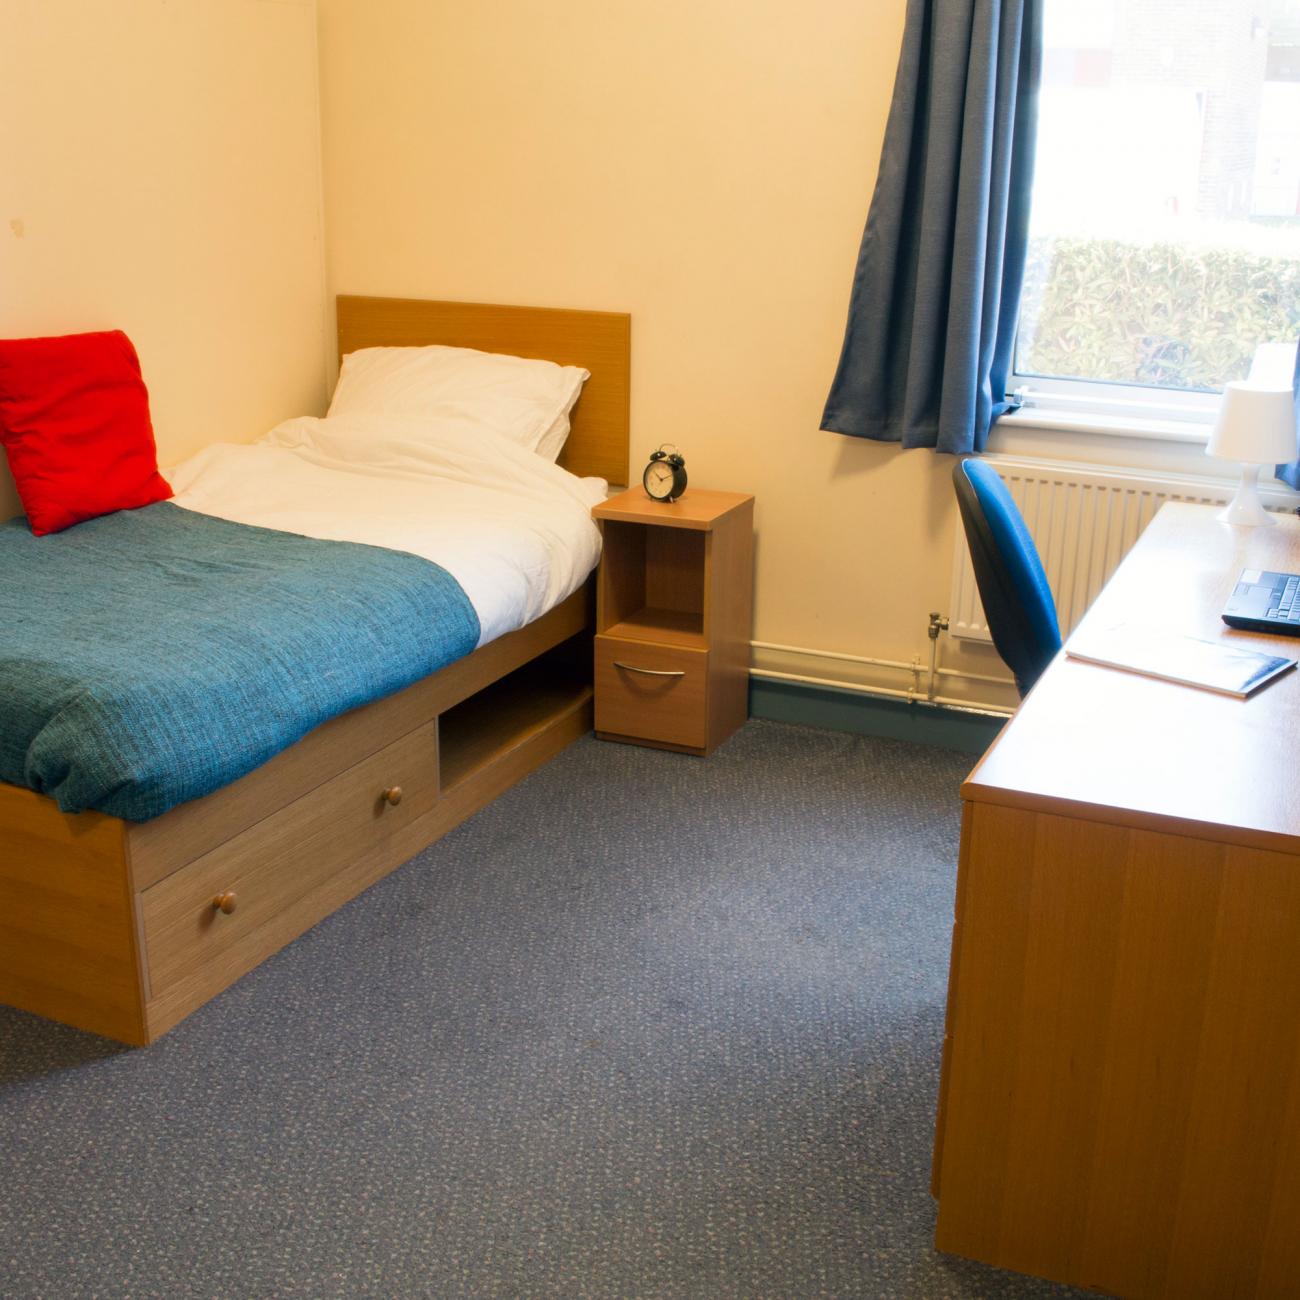 A spacious bedroom. The floor is blue carpeted and a neatly made single bed is visible against one wall. On the other side of the room is a wooden desk with office chair and a large window.